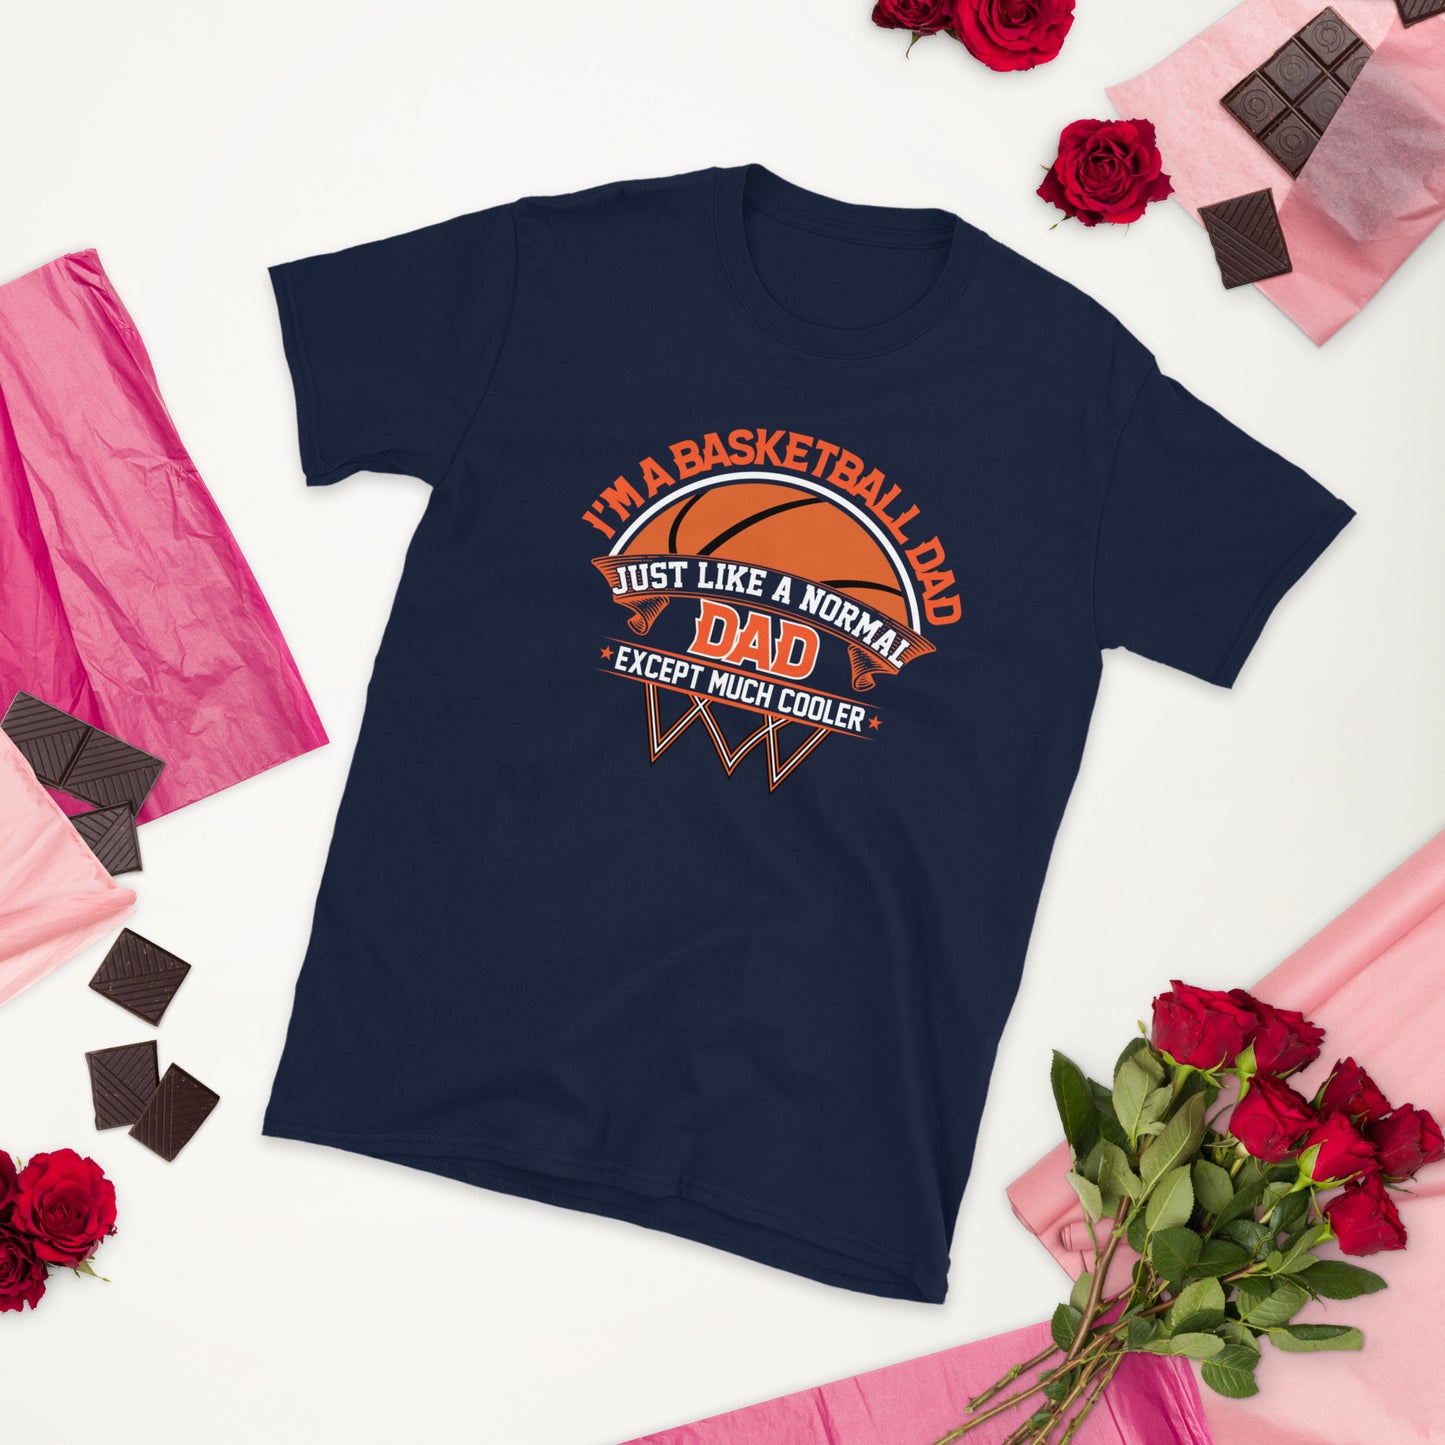 "I'm a Basketball Dad" Personalized T-Shirt.